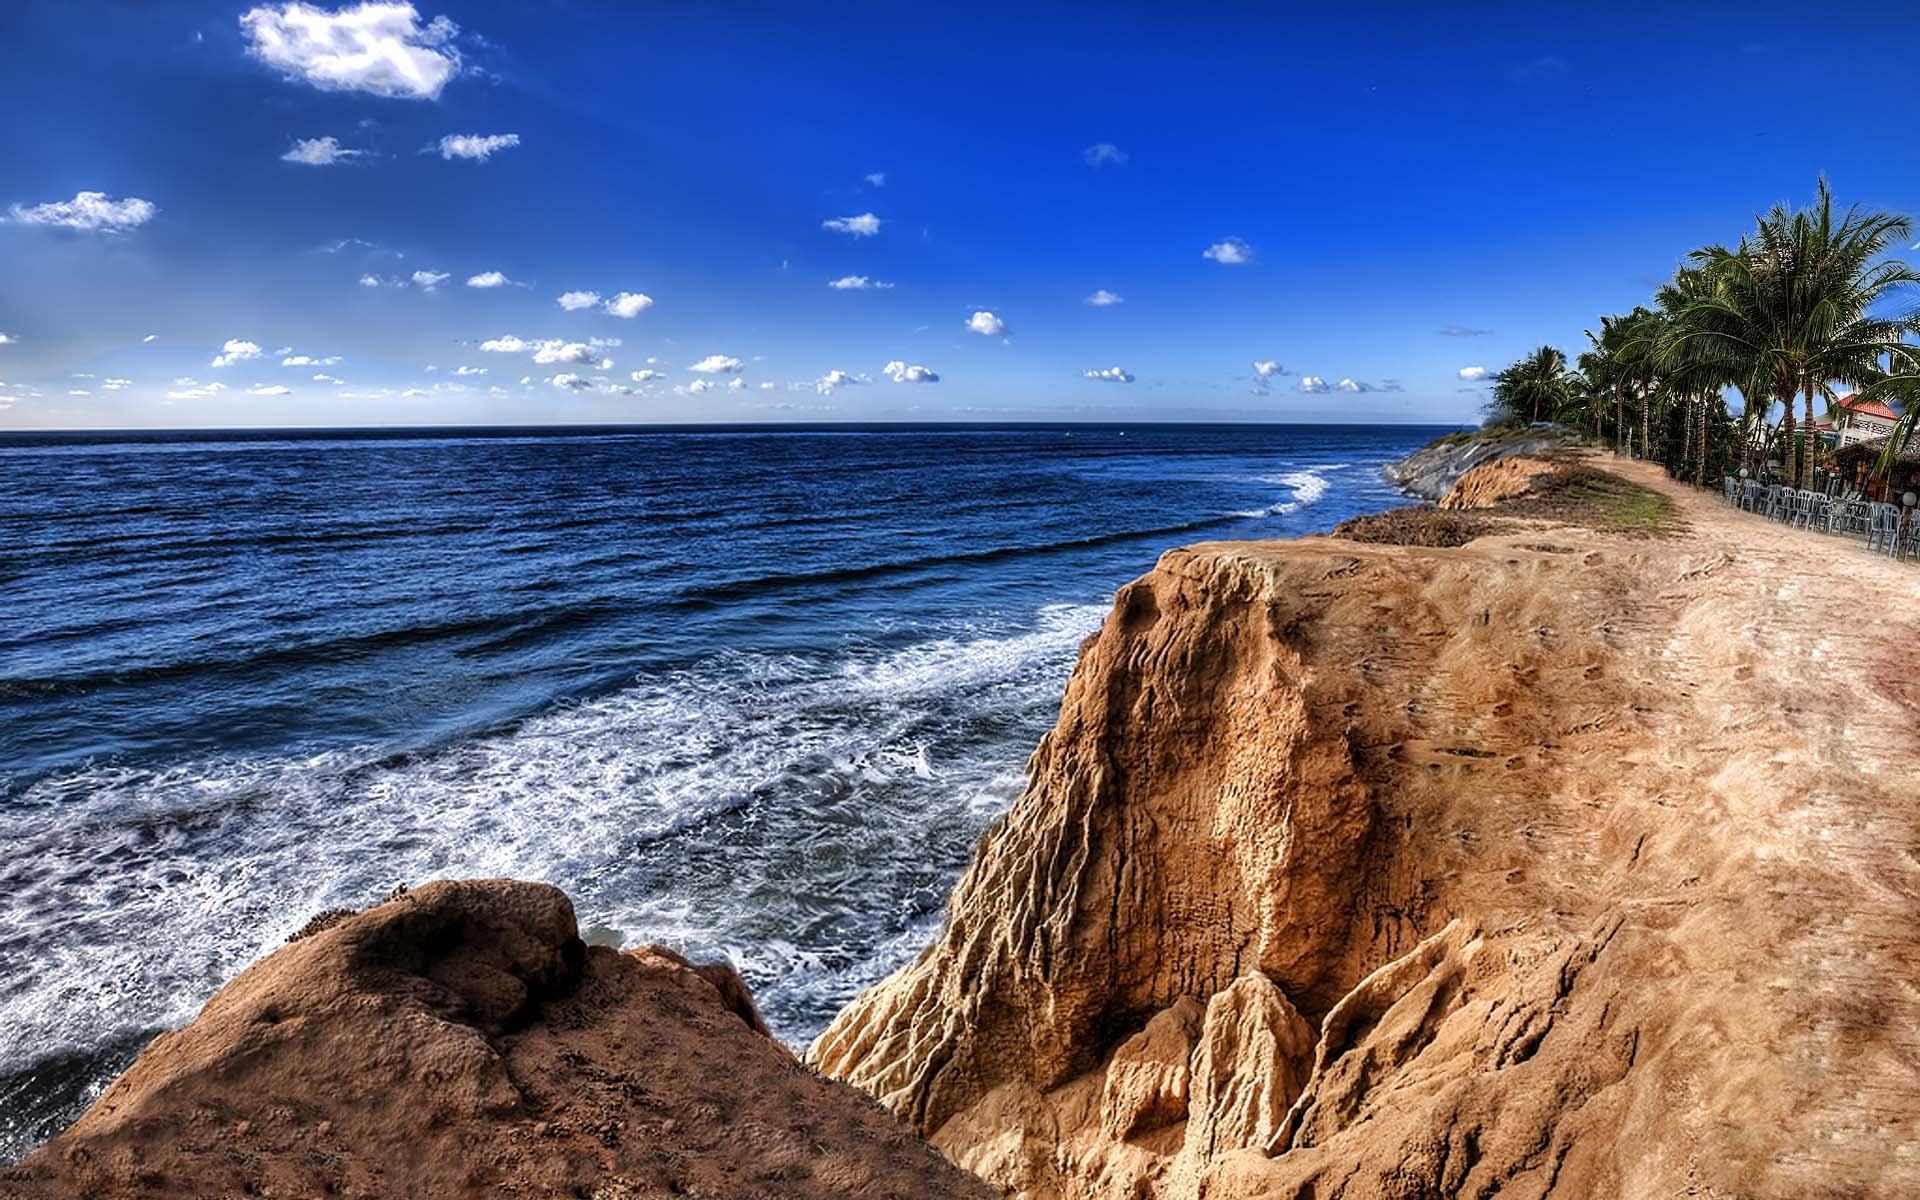 A serene coastline view showcasing the beauty of nature, ideal for a refreshing desktop wallpaper.